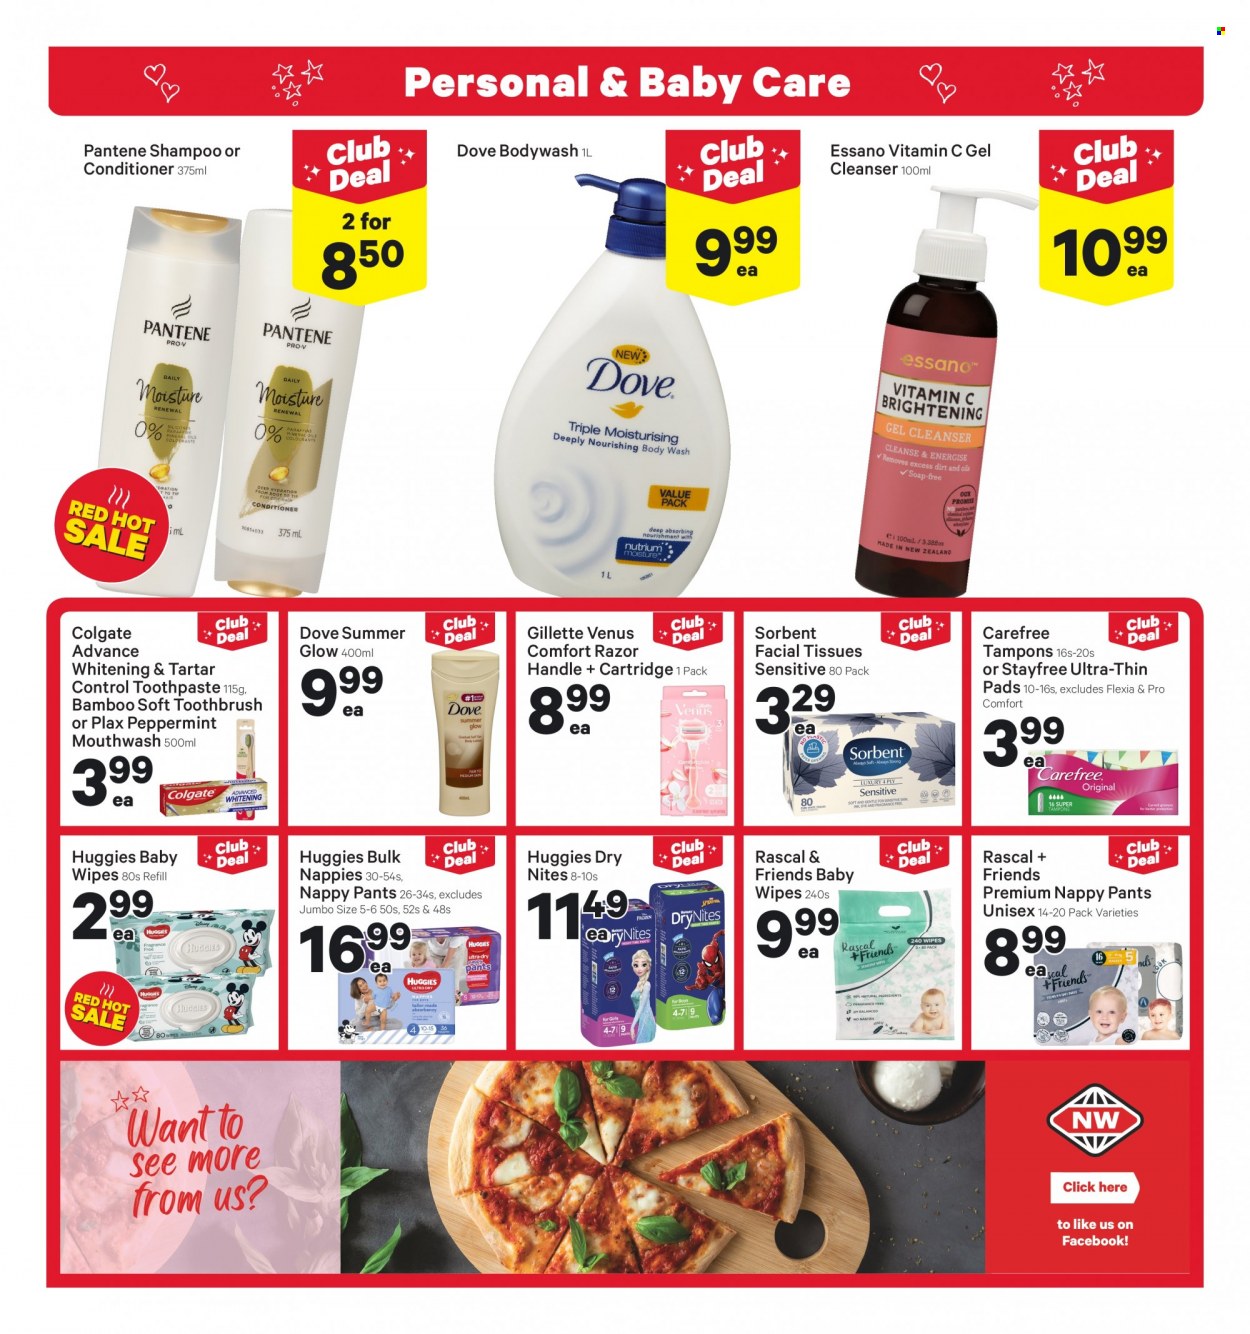 thumbnail - New World mailer - 23.01.2023 - 29.01.2023 - Sales products - Dove, wipes, Huggies, pants, baby wipes, nappies, tissues, shampoo, Colgate, toothbrush, toothpaste, mouthwash, Plax, Stayfree, Carefree, tampons, cleanser, facial tissues, conditioner, Pantene, Essano, Gillette, razor, Venus, vitamin c. Page 18.